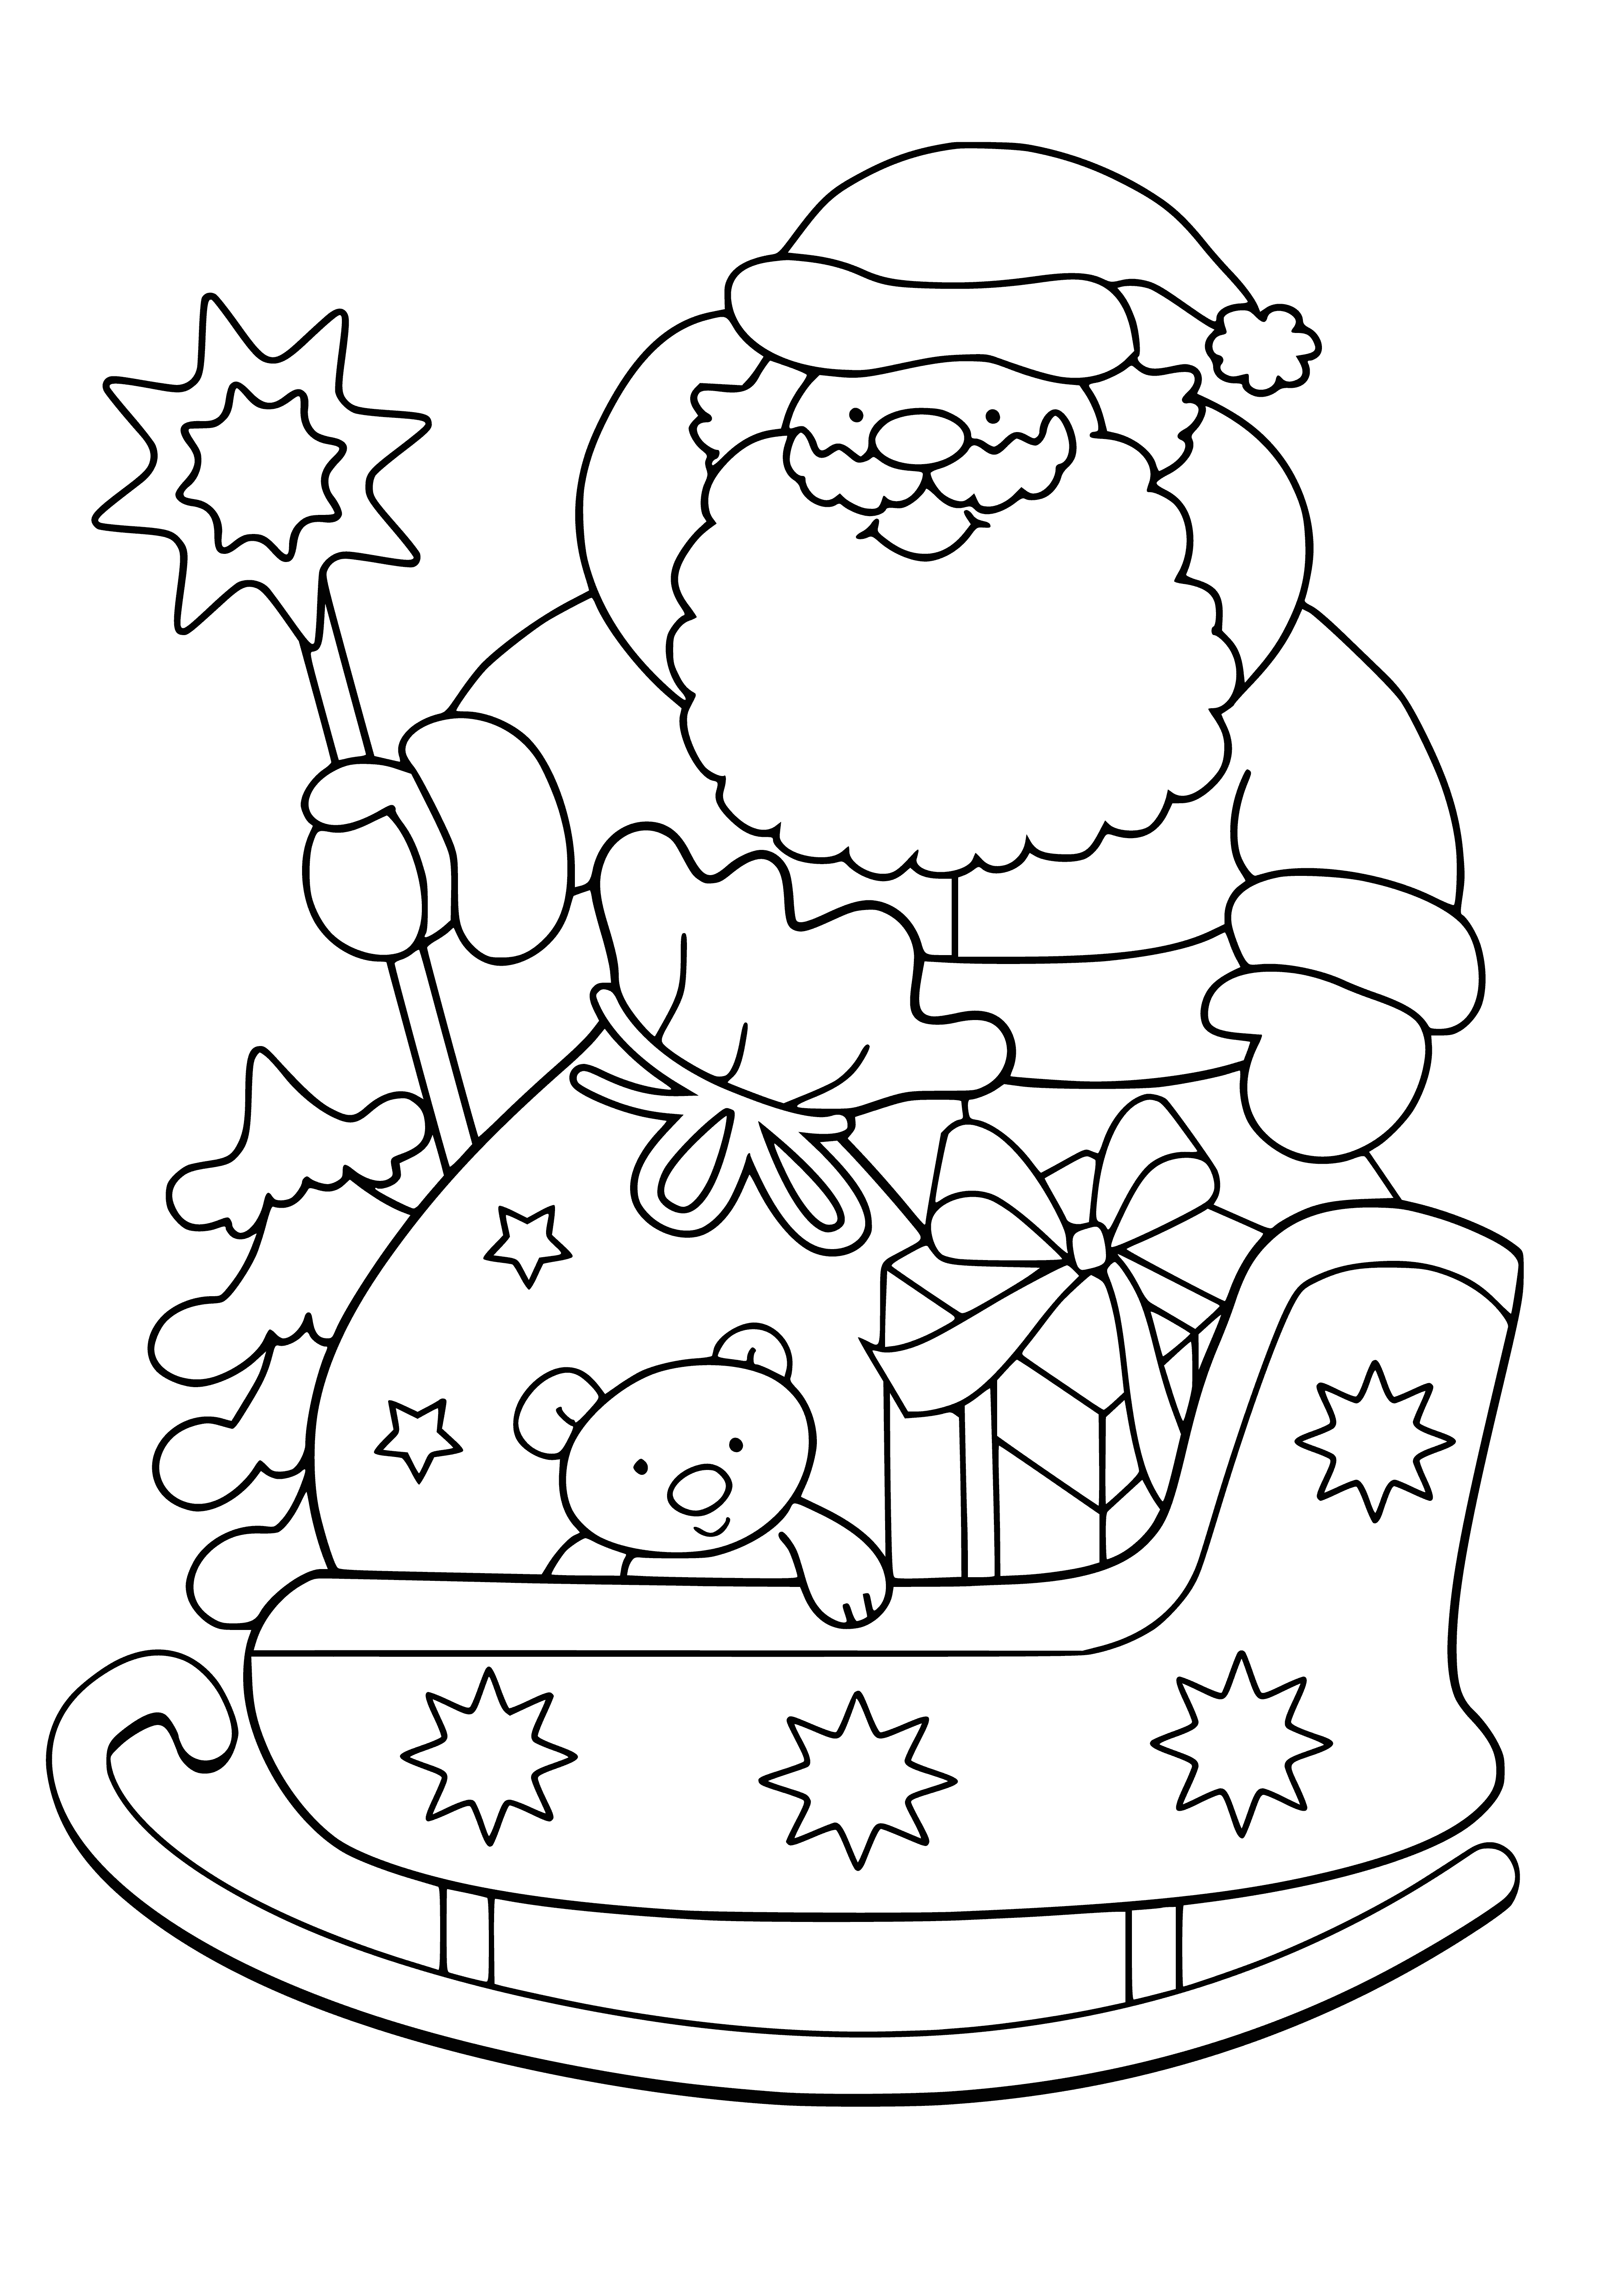 coloring page: A man dressed in a red suit with fur trim is in a sleigh being pulled by reindeer, with presents. He's ready to deliver Christmas joy! #Santa #Christmas